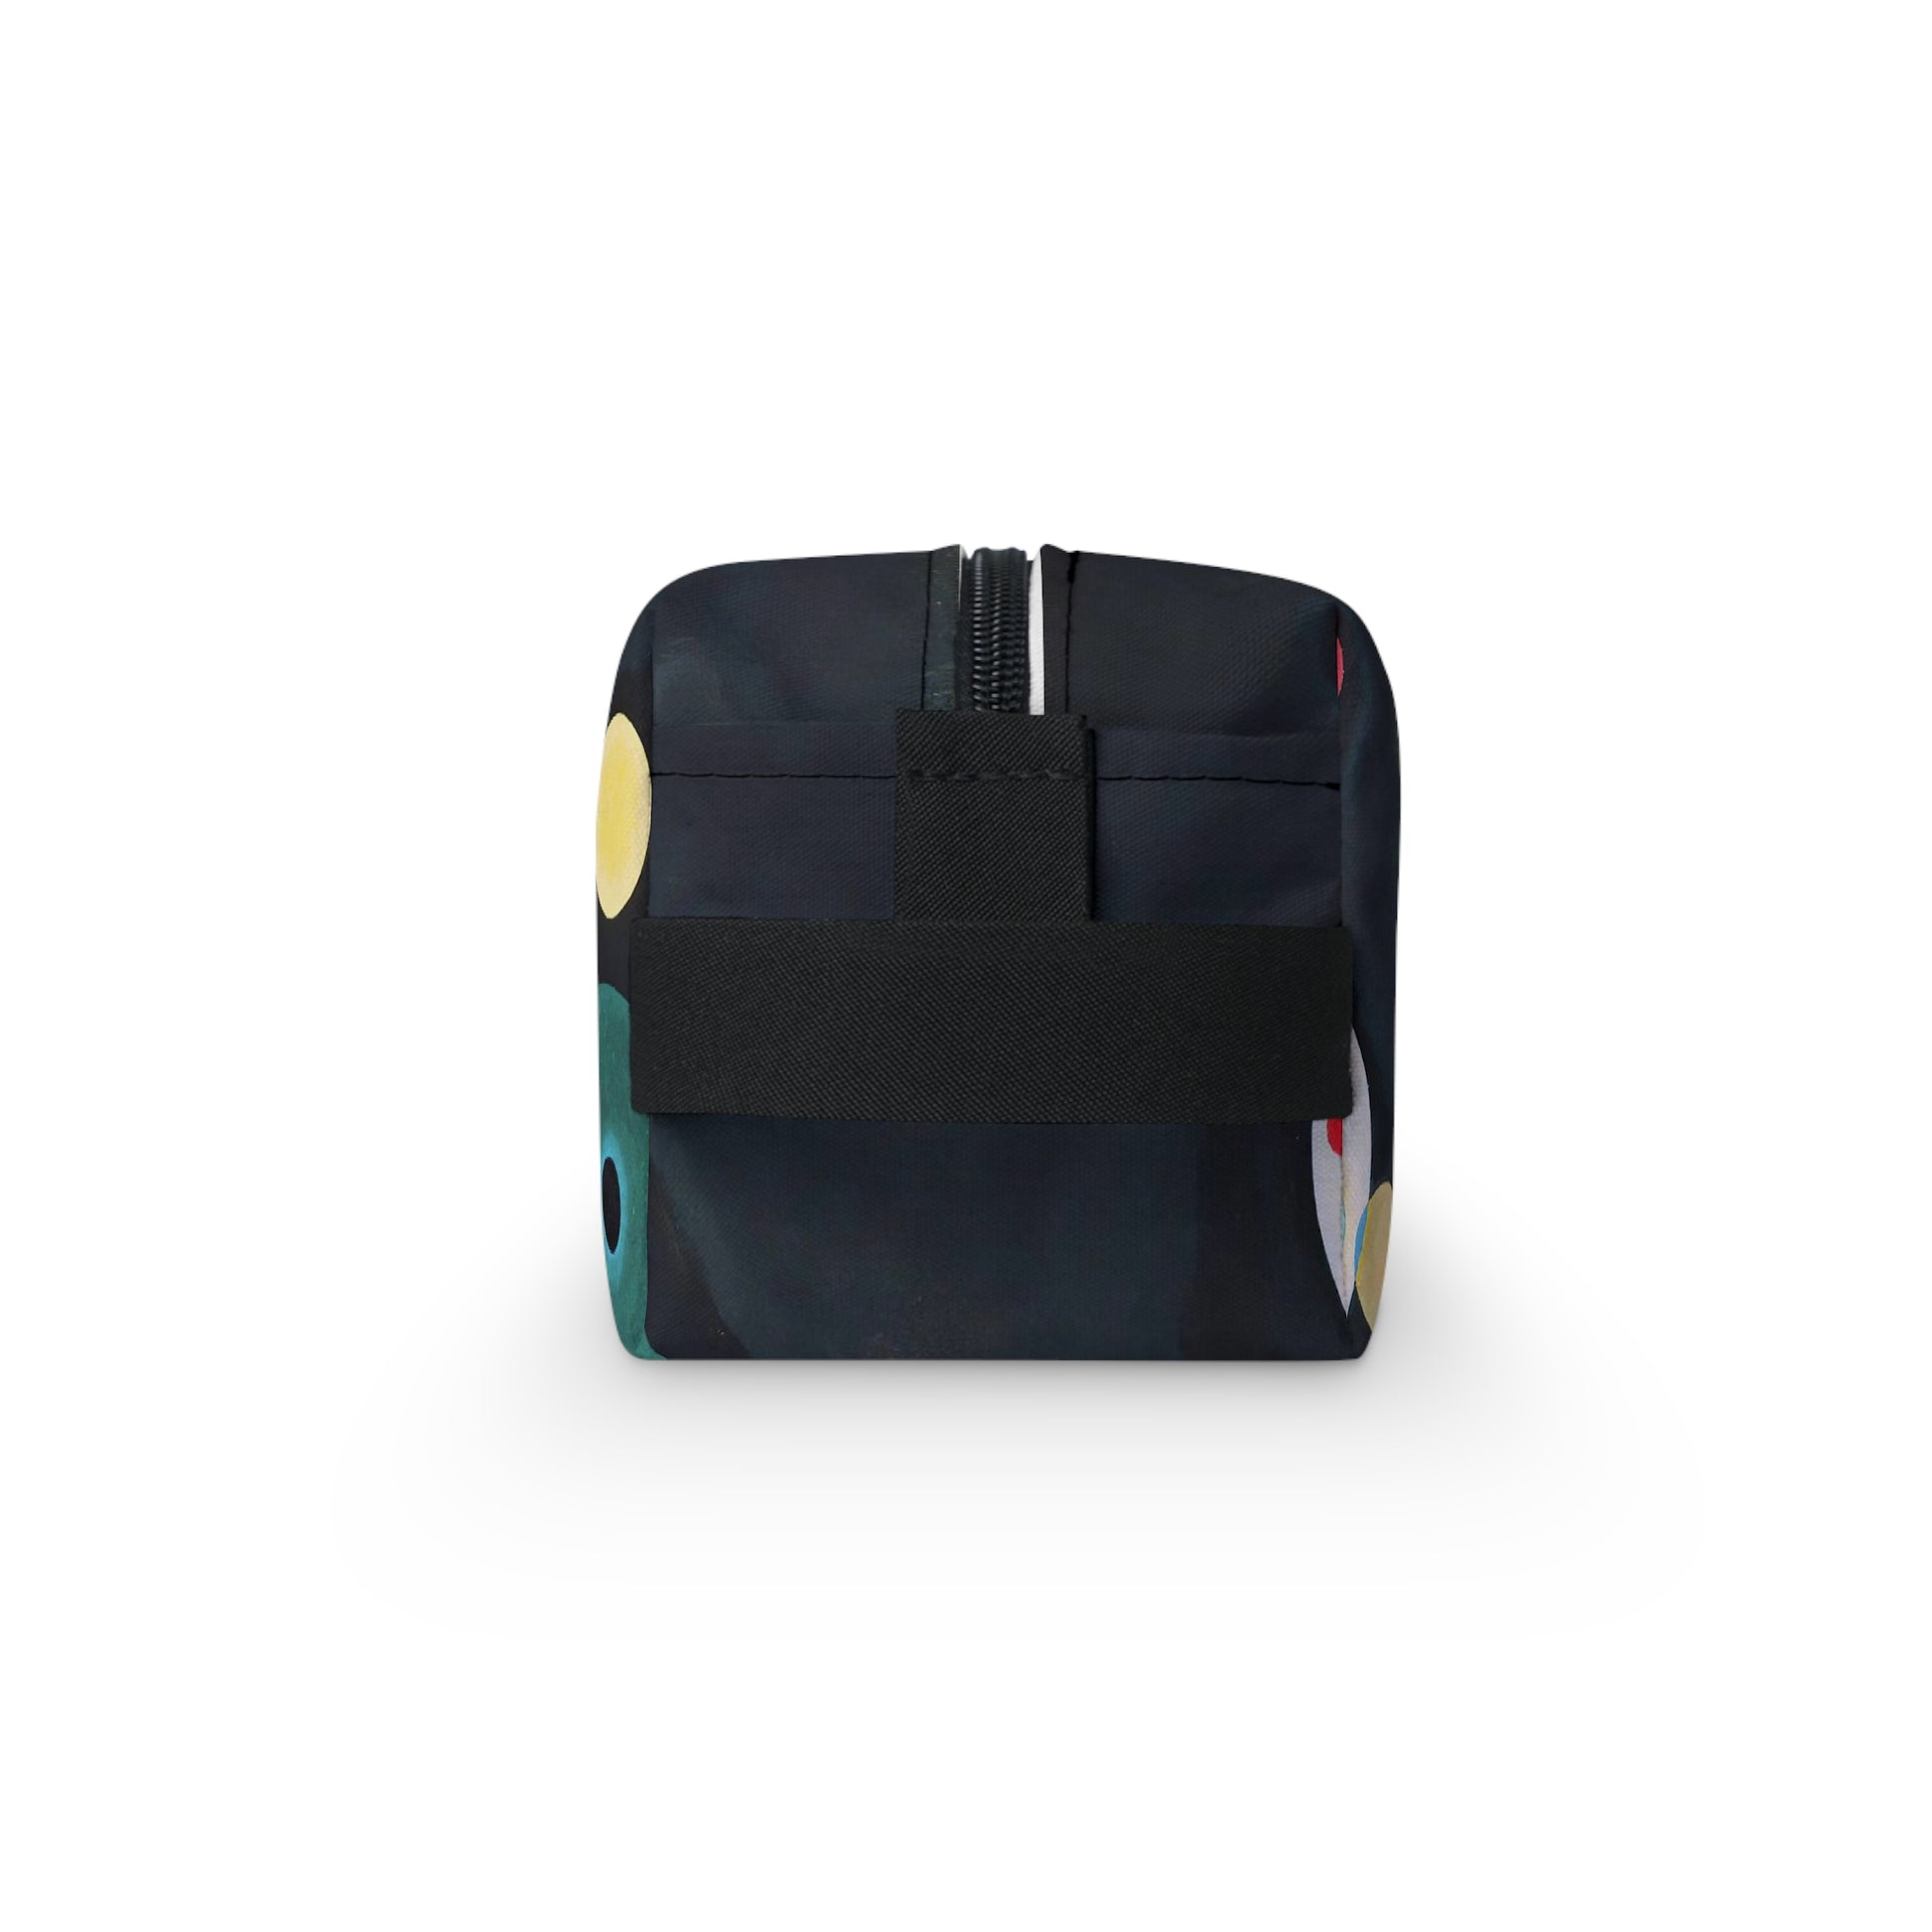 WASSILY KANDINSKY - SEVERAL CIRCLES - UNISEX TOILETRY BAG